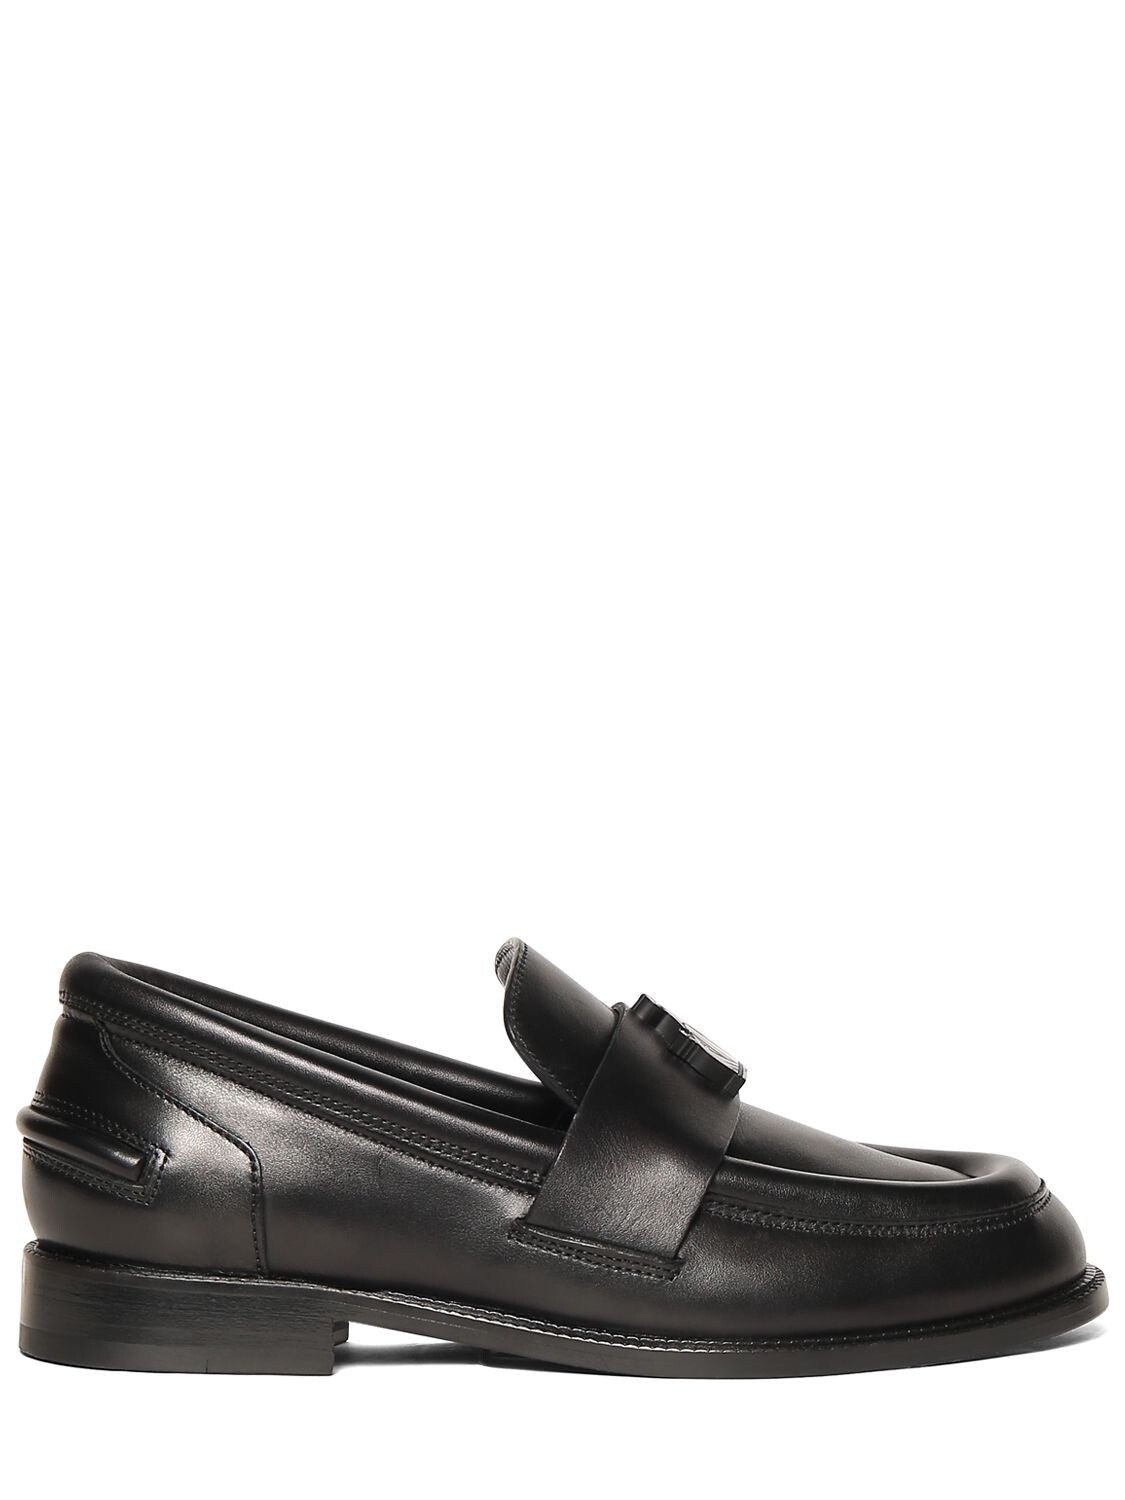 LANVIN 25mm M&e Leather Loafers in black